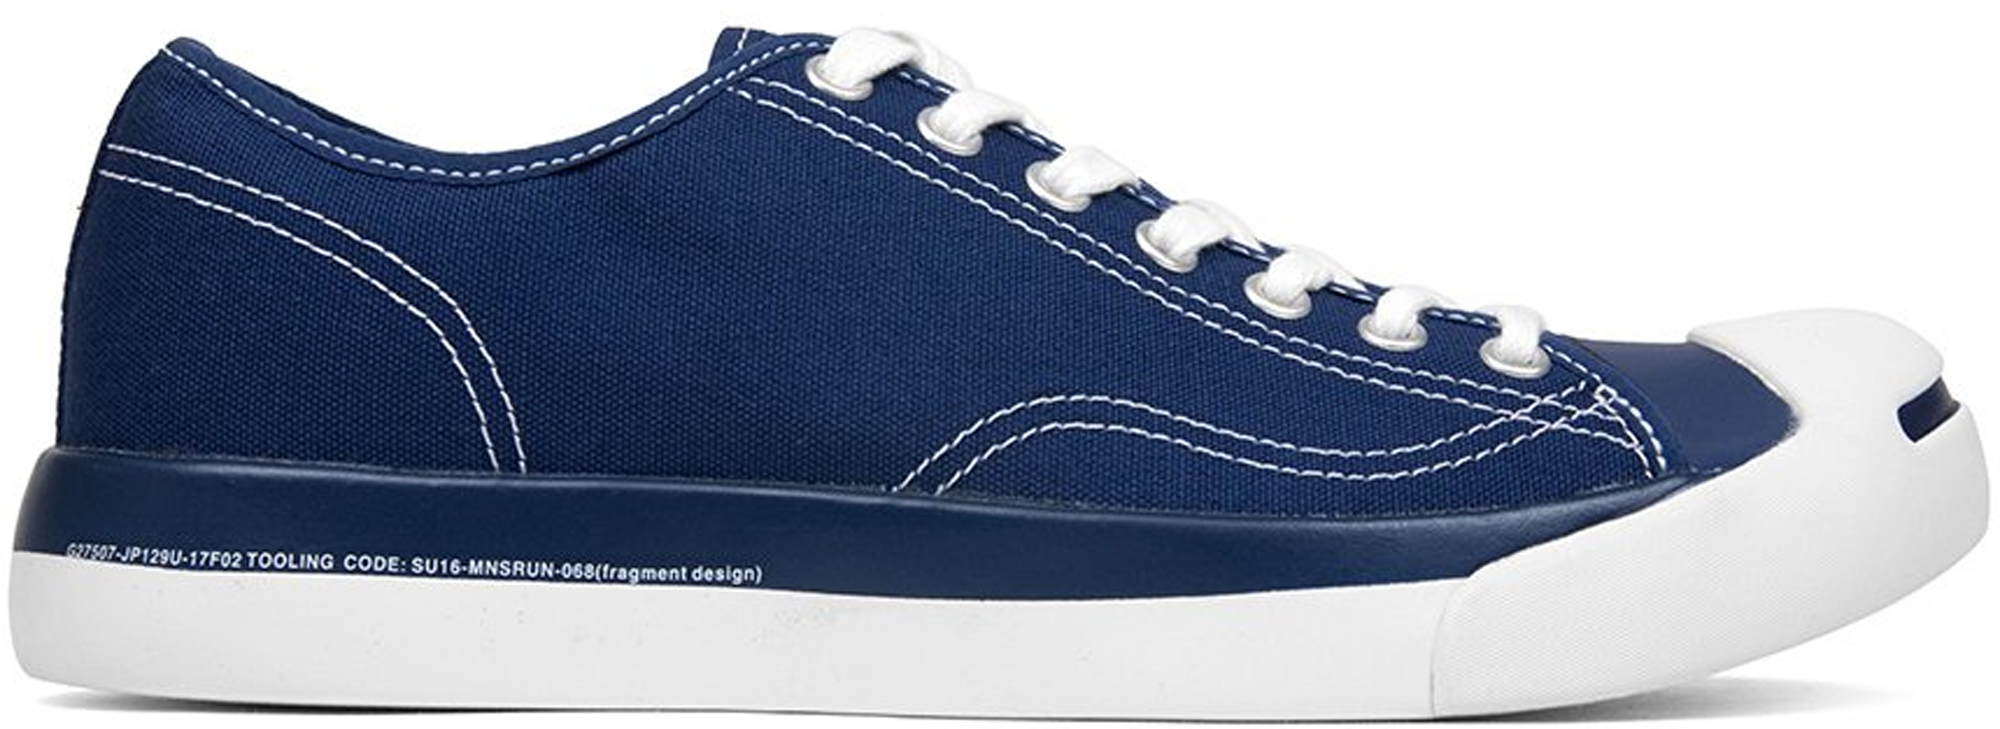 Converse Jack Purcell Modern Fragment 